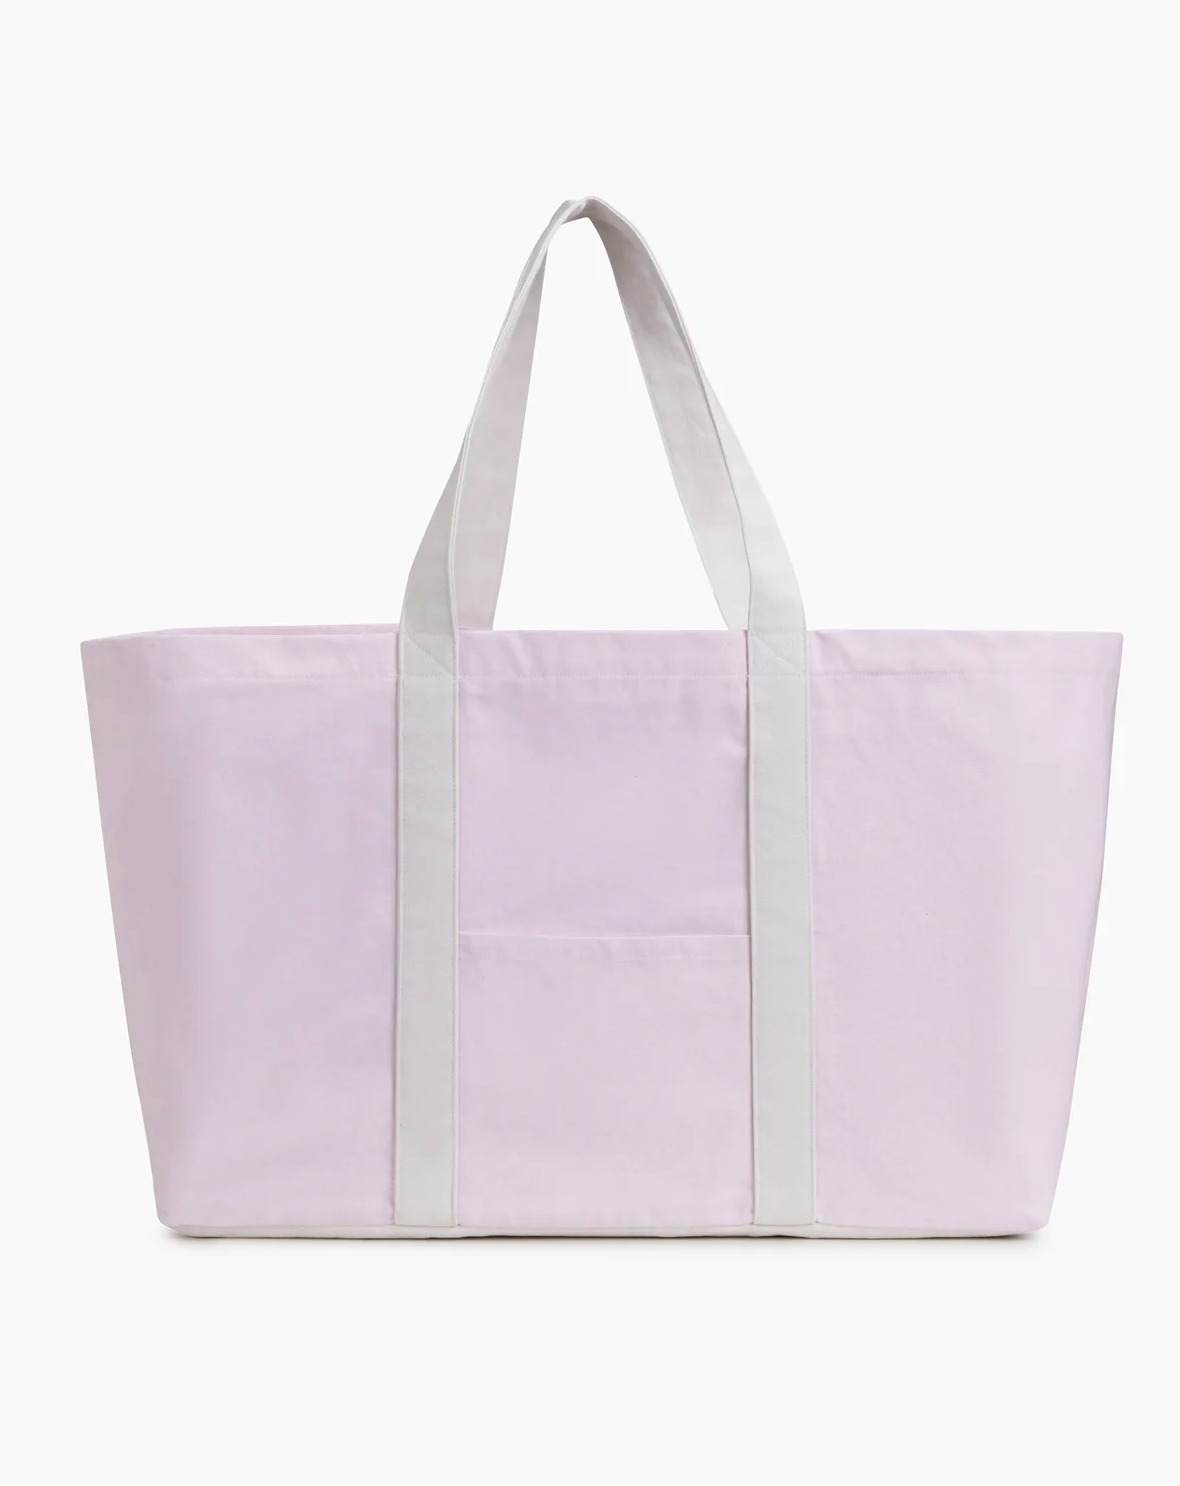 It's unclear when Mariko will restock the bags